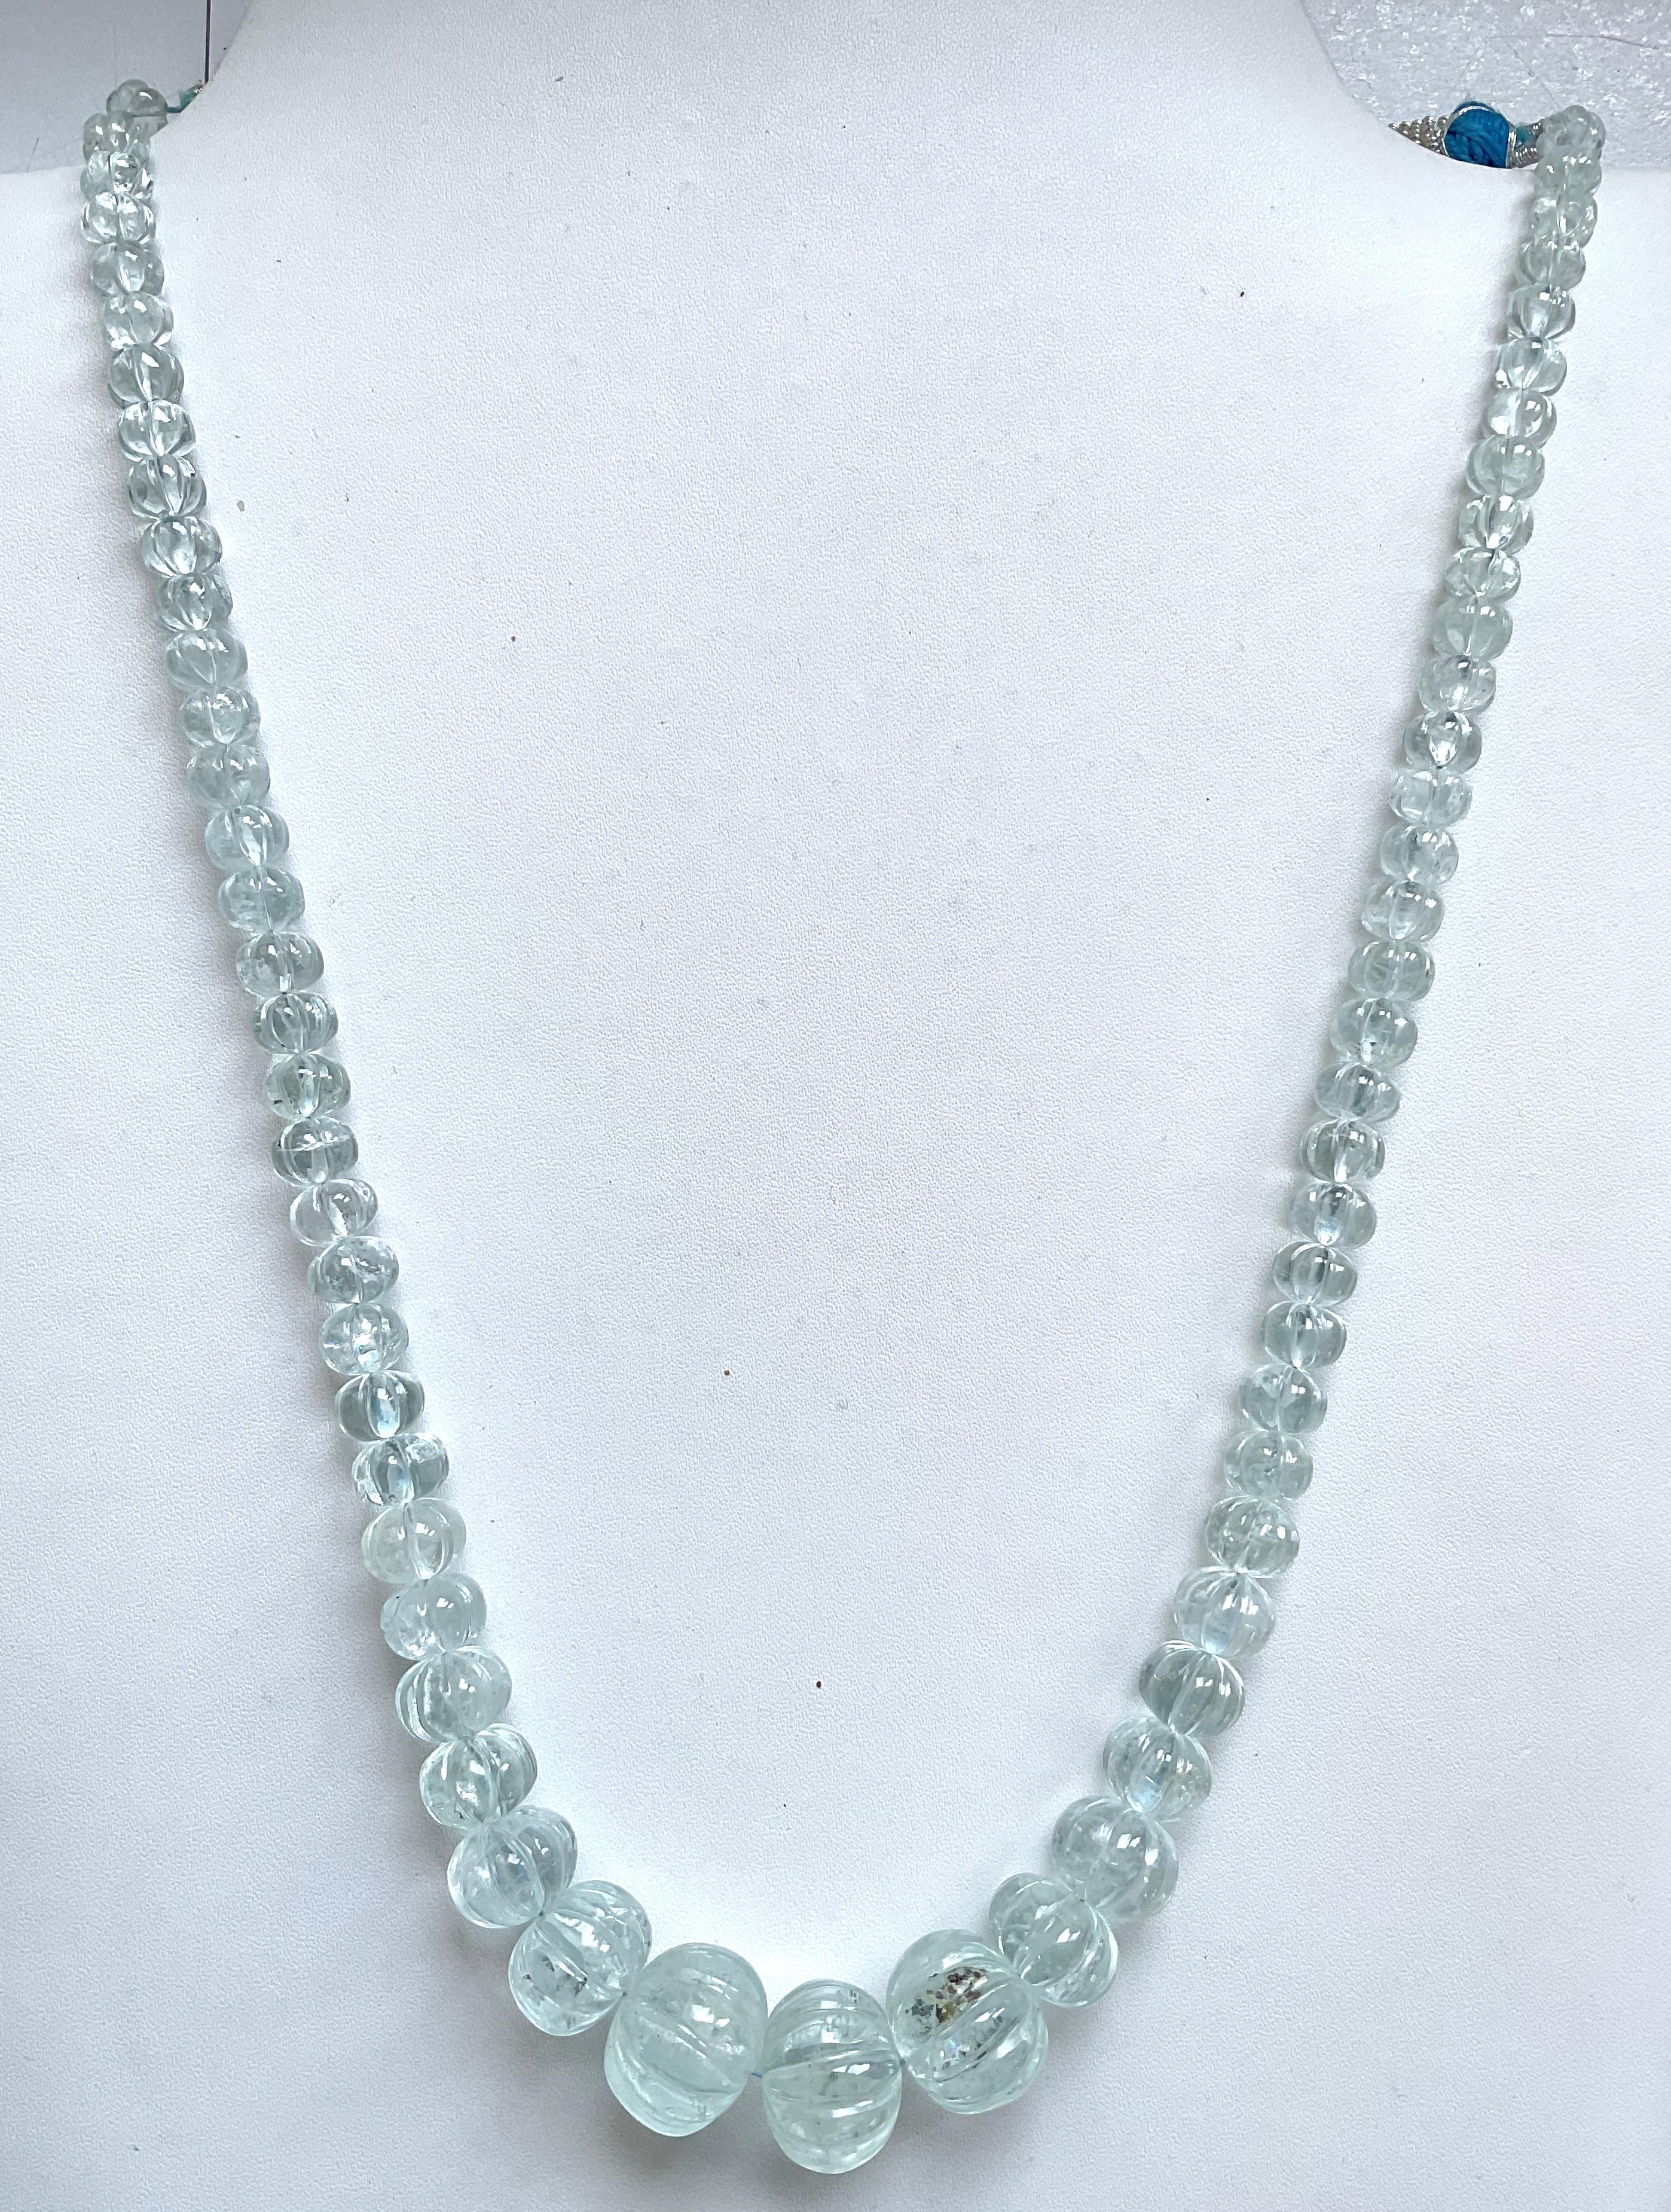 327.80 Carats Aquamarine Carved Melon Beads Necklace Natural Gemstone For Sale 2